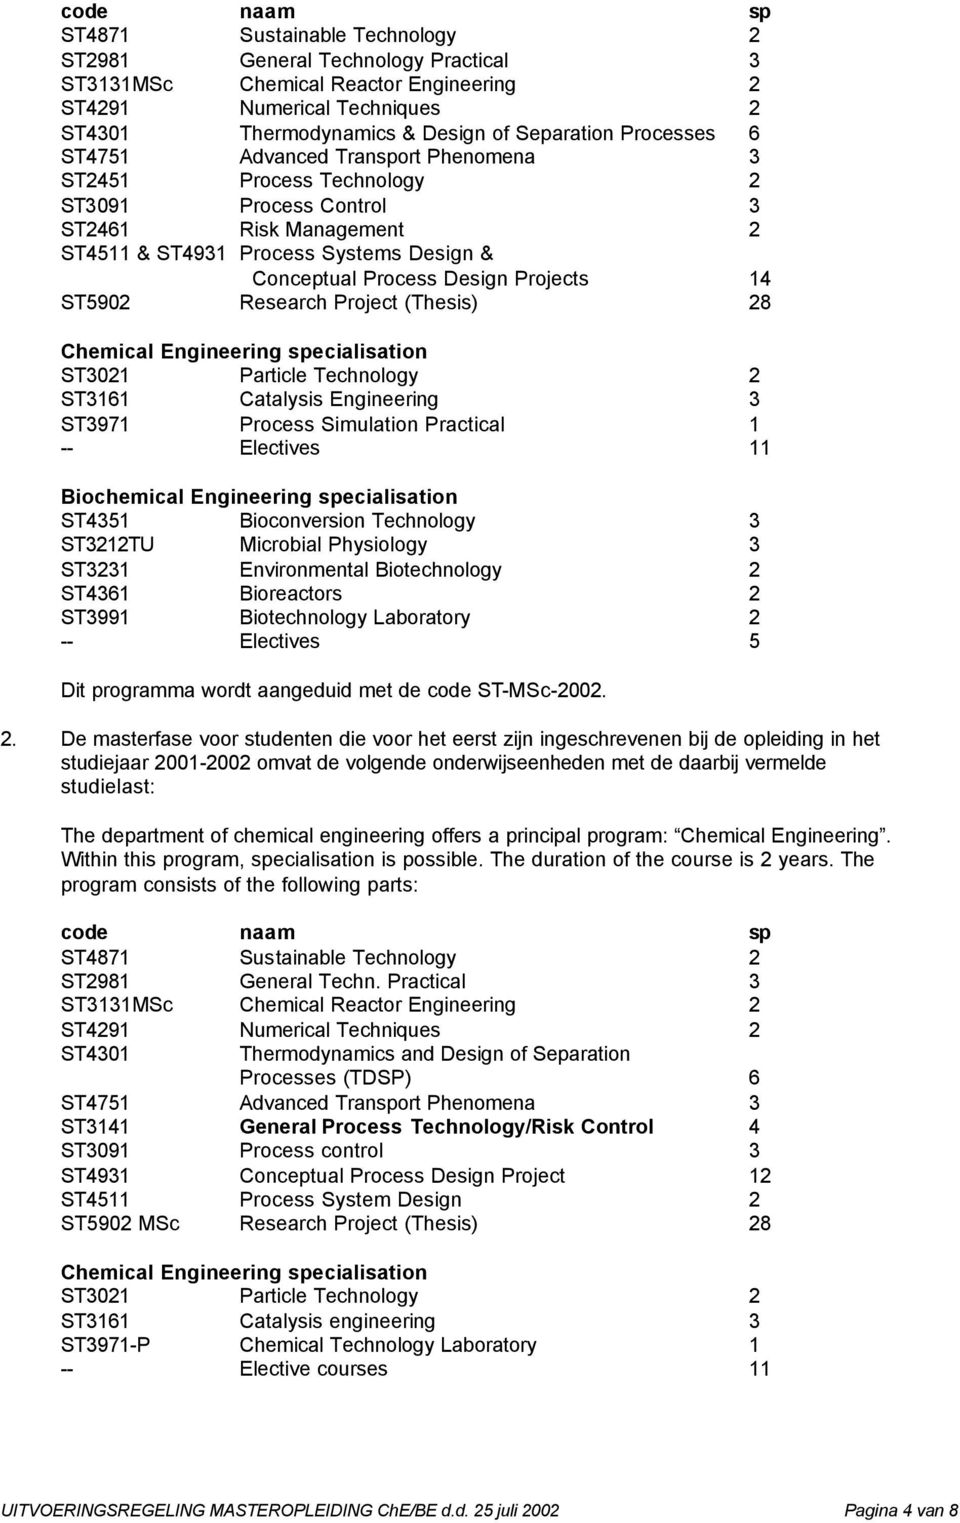 Projects 14 ST5902 Research Project (Thesis) 28 Chemical Engineering specialisation ST3021 Particle Technology 2 ST3161 Catalysis Engineering 3 ST3971 Process Simulation Practical 1 -- Electives 11